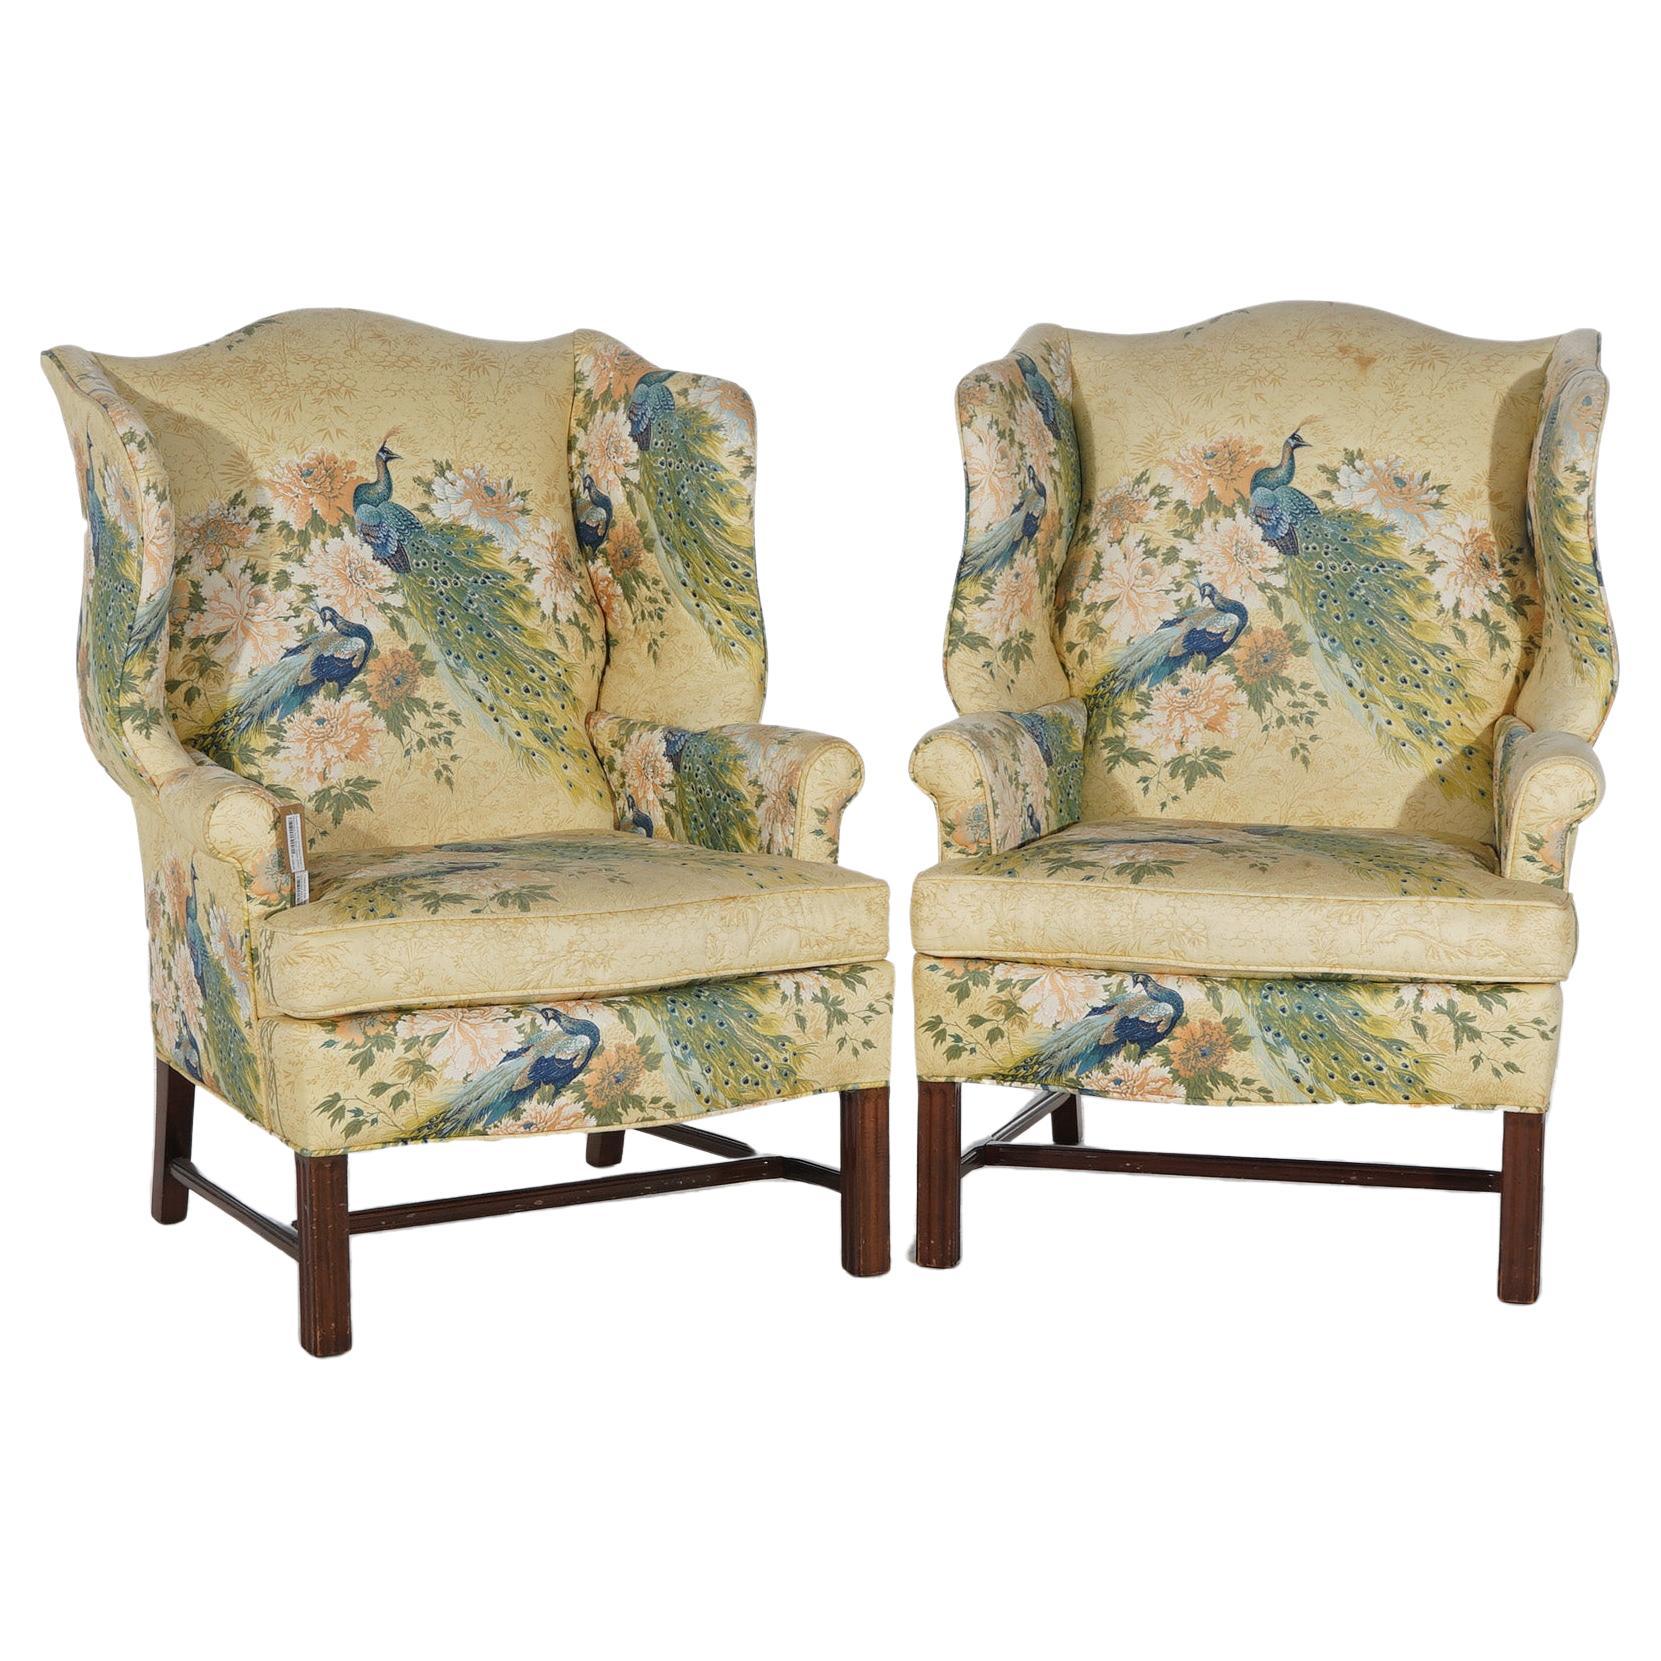 Pair of English Colonial Peacock & Floral Decorated Wing Back Chairs 20thC For Sale